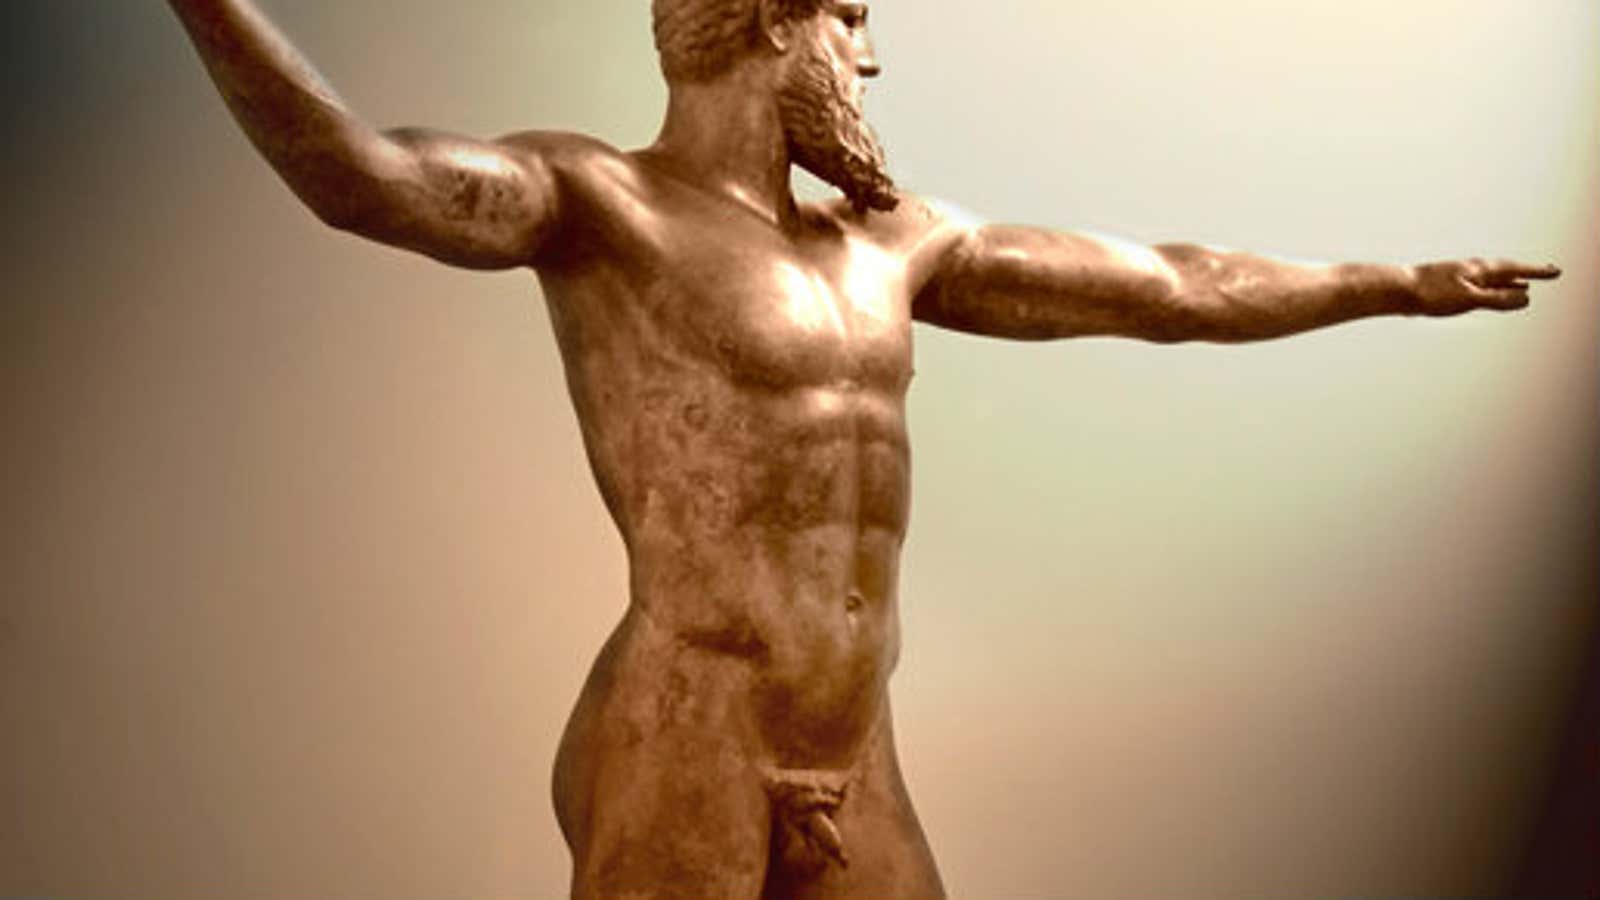 In ancient Greece, the most impressive men had small penises.